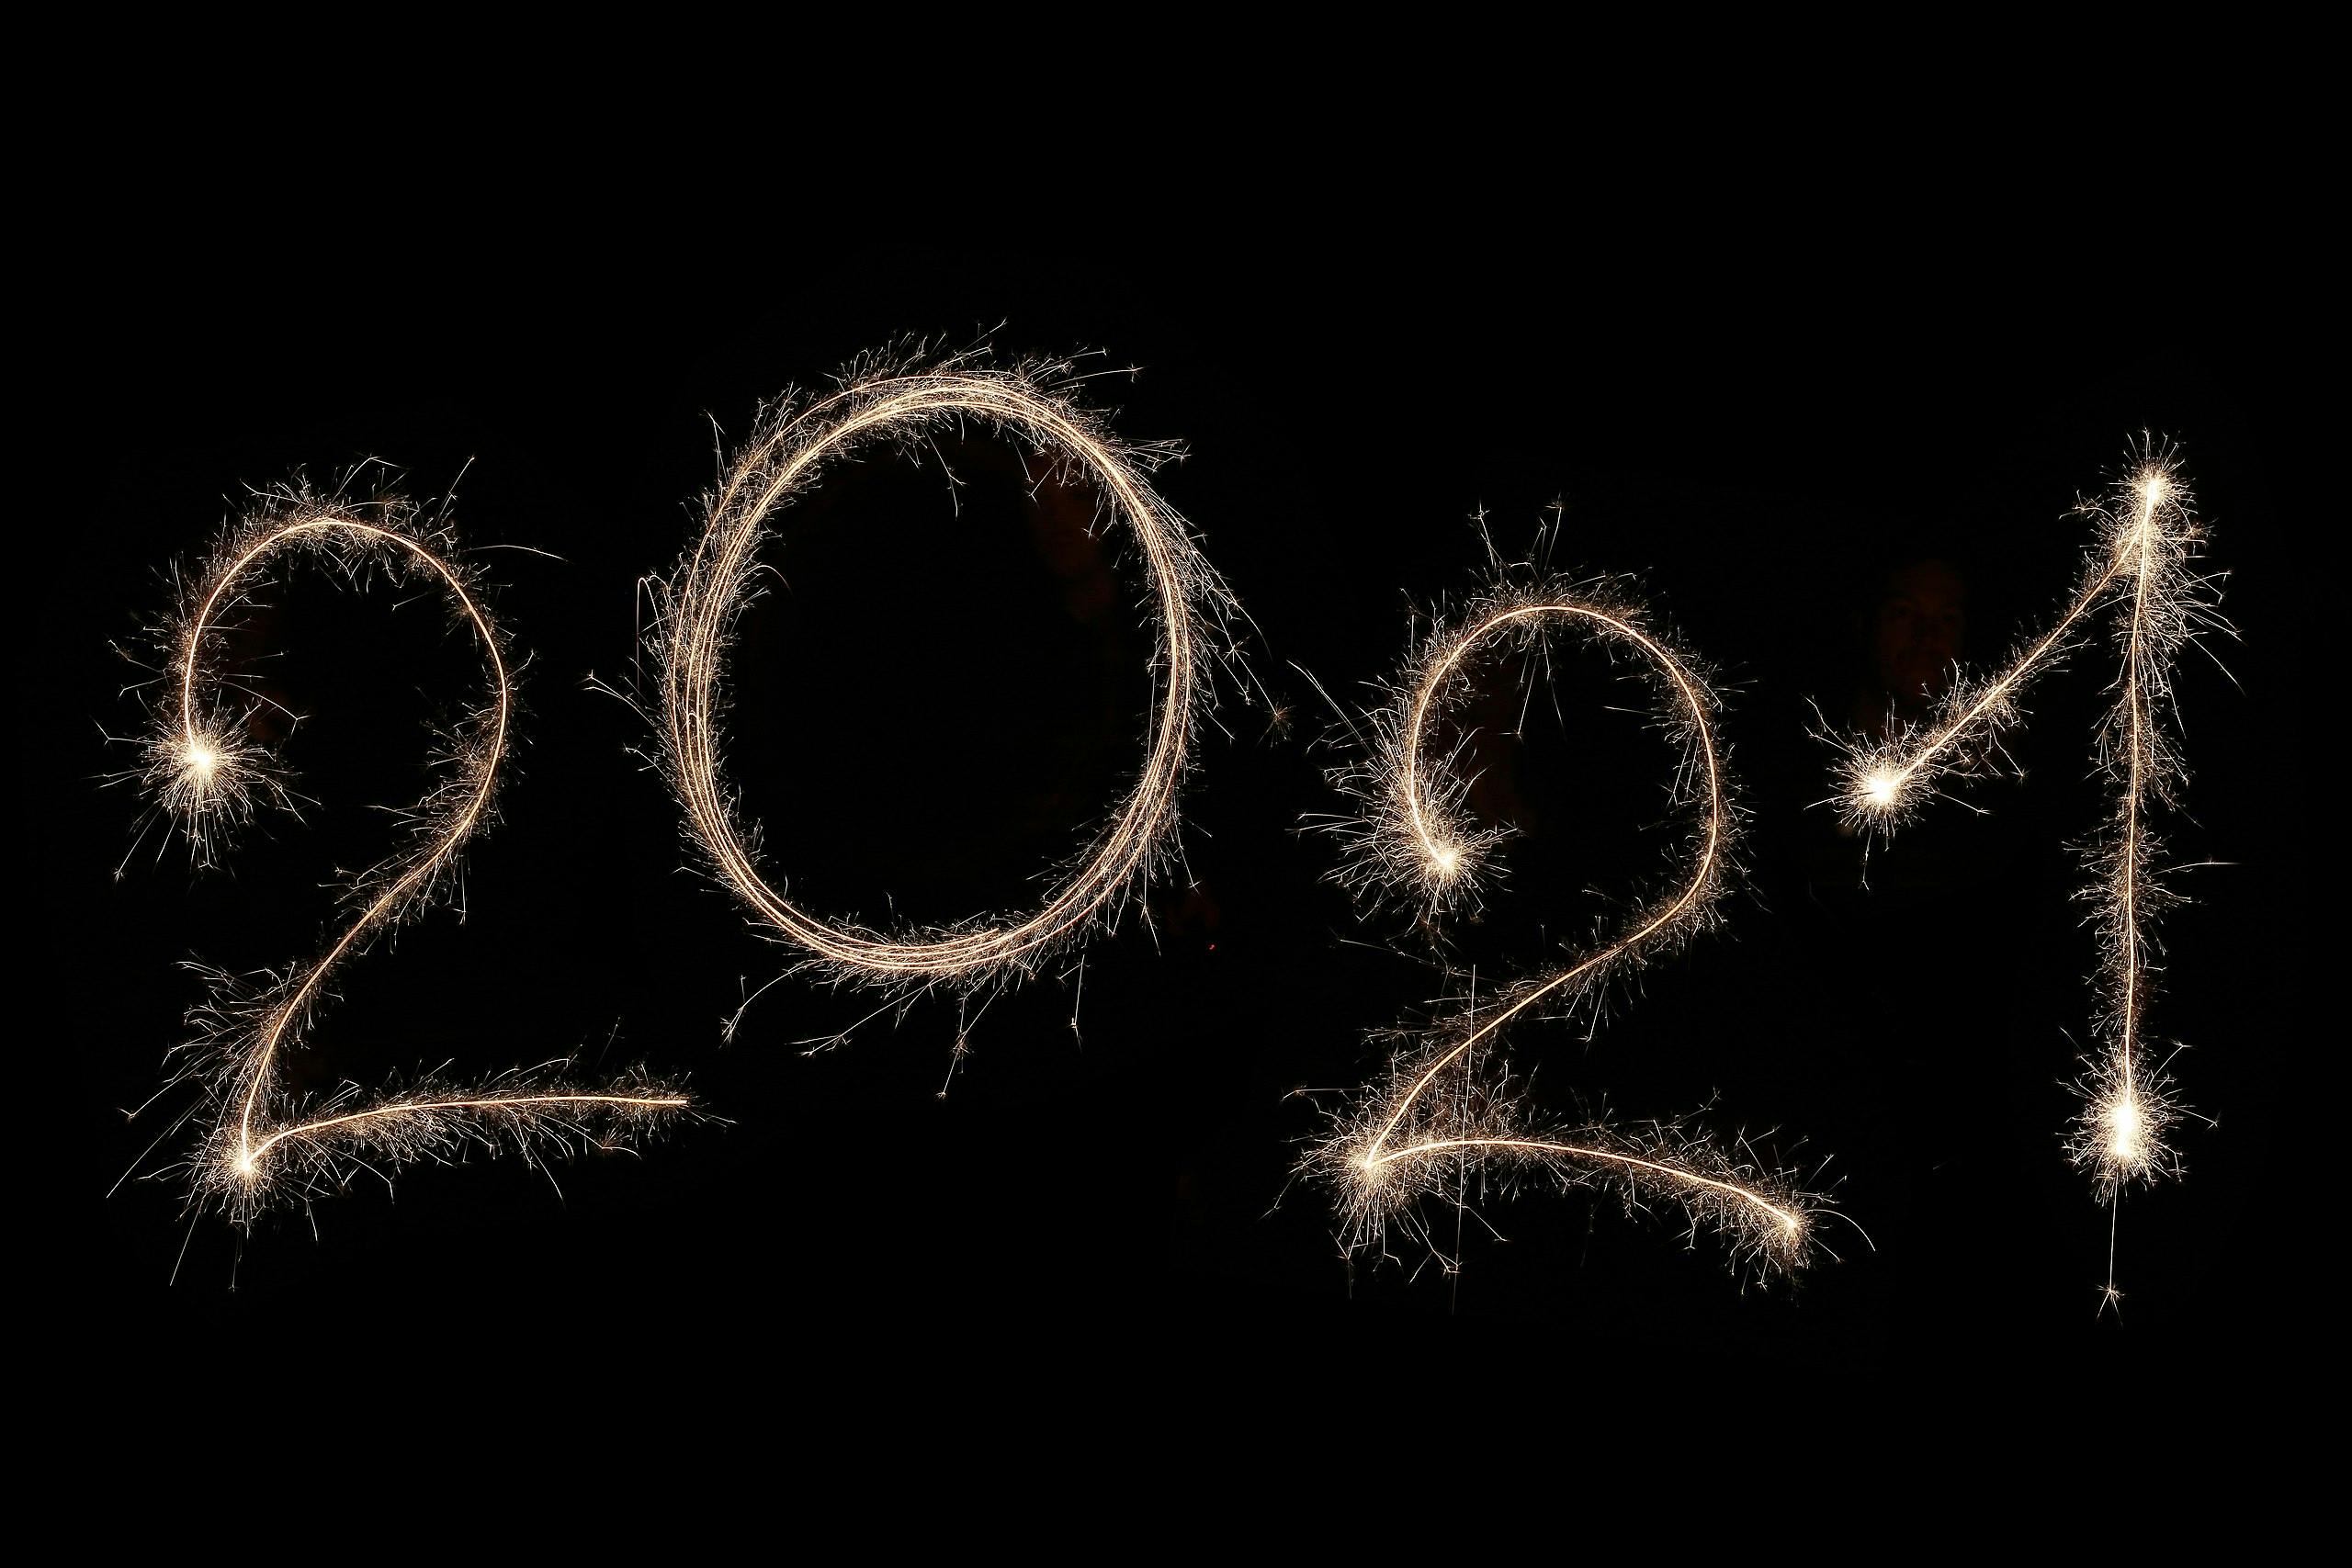 The number 2021 written with sparklers